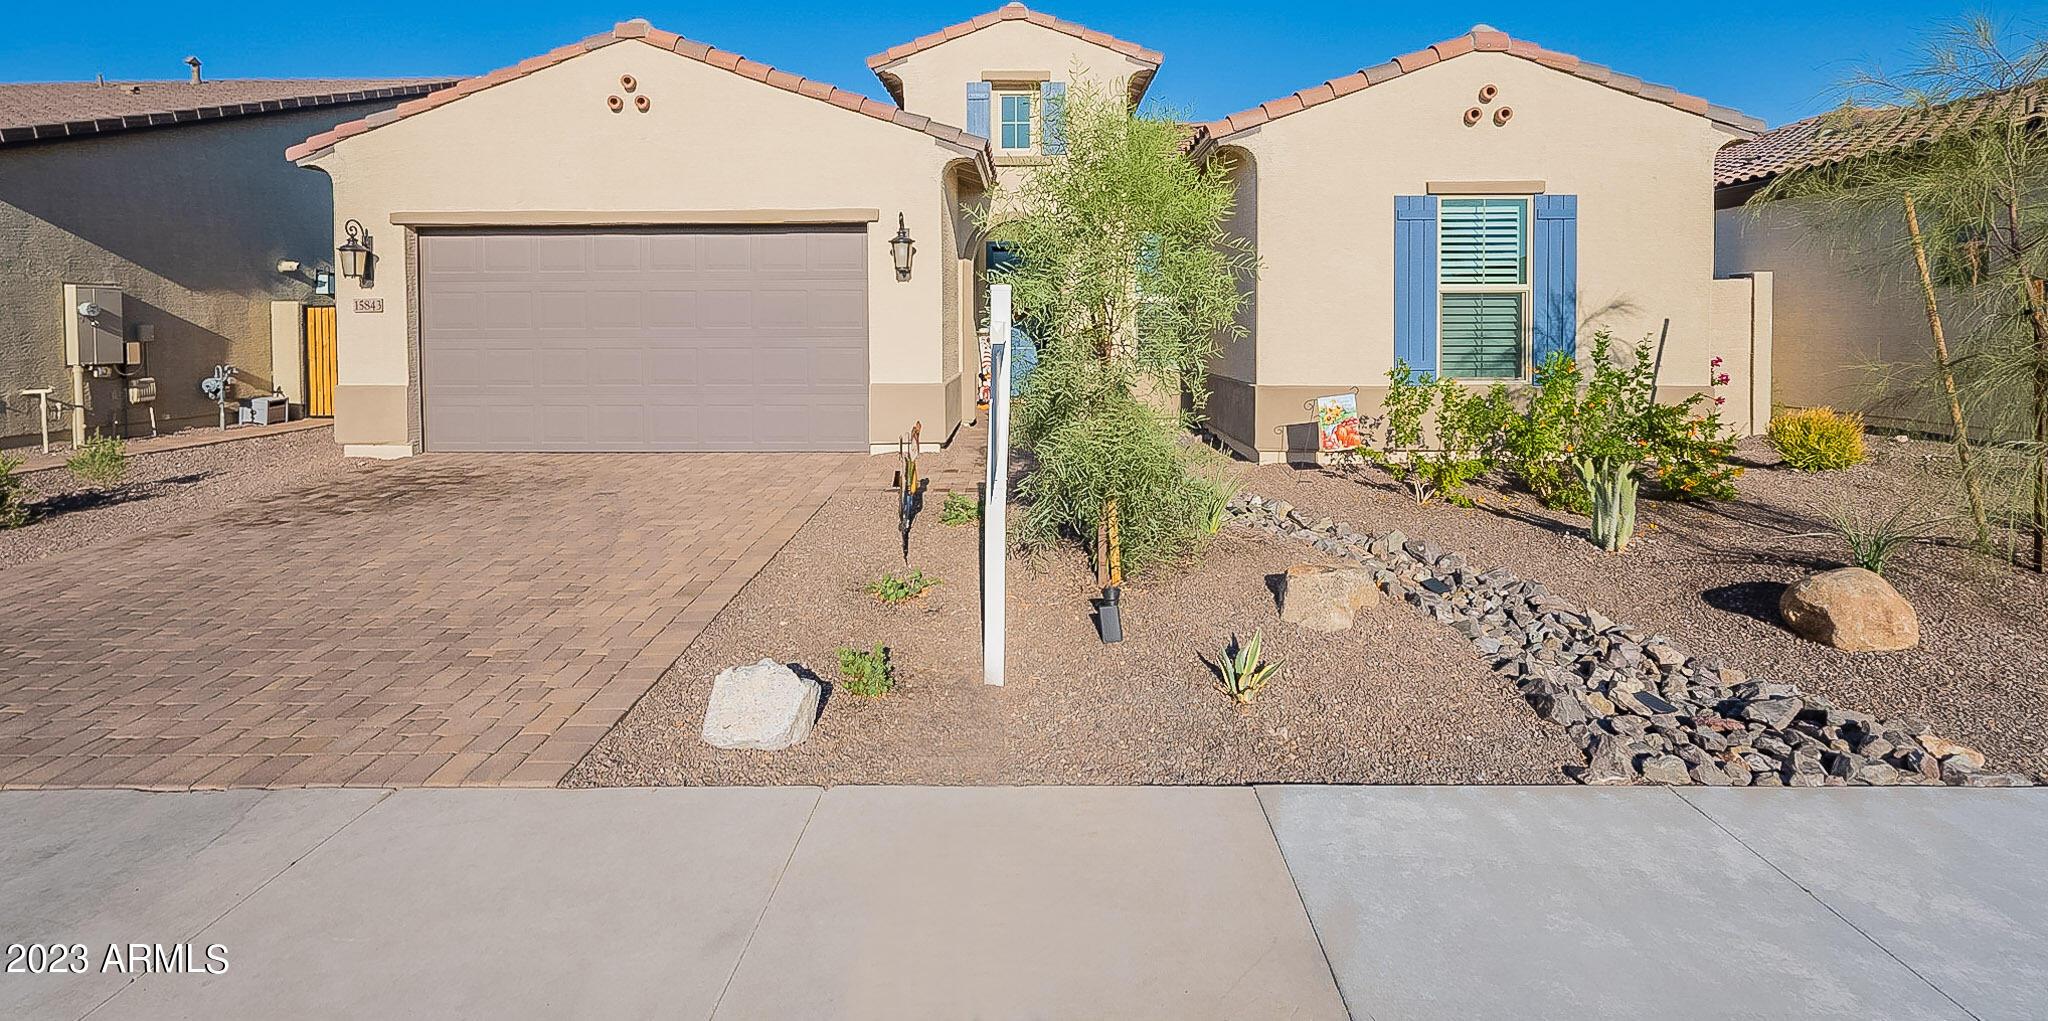 Photo one of 15843 S 177Th Ave Goodyear AZ 85338 | MLS 6614463